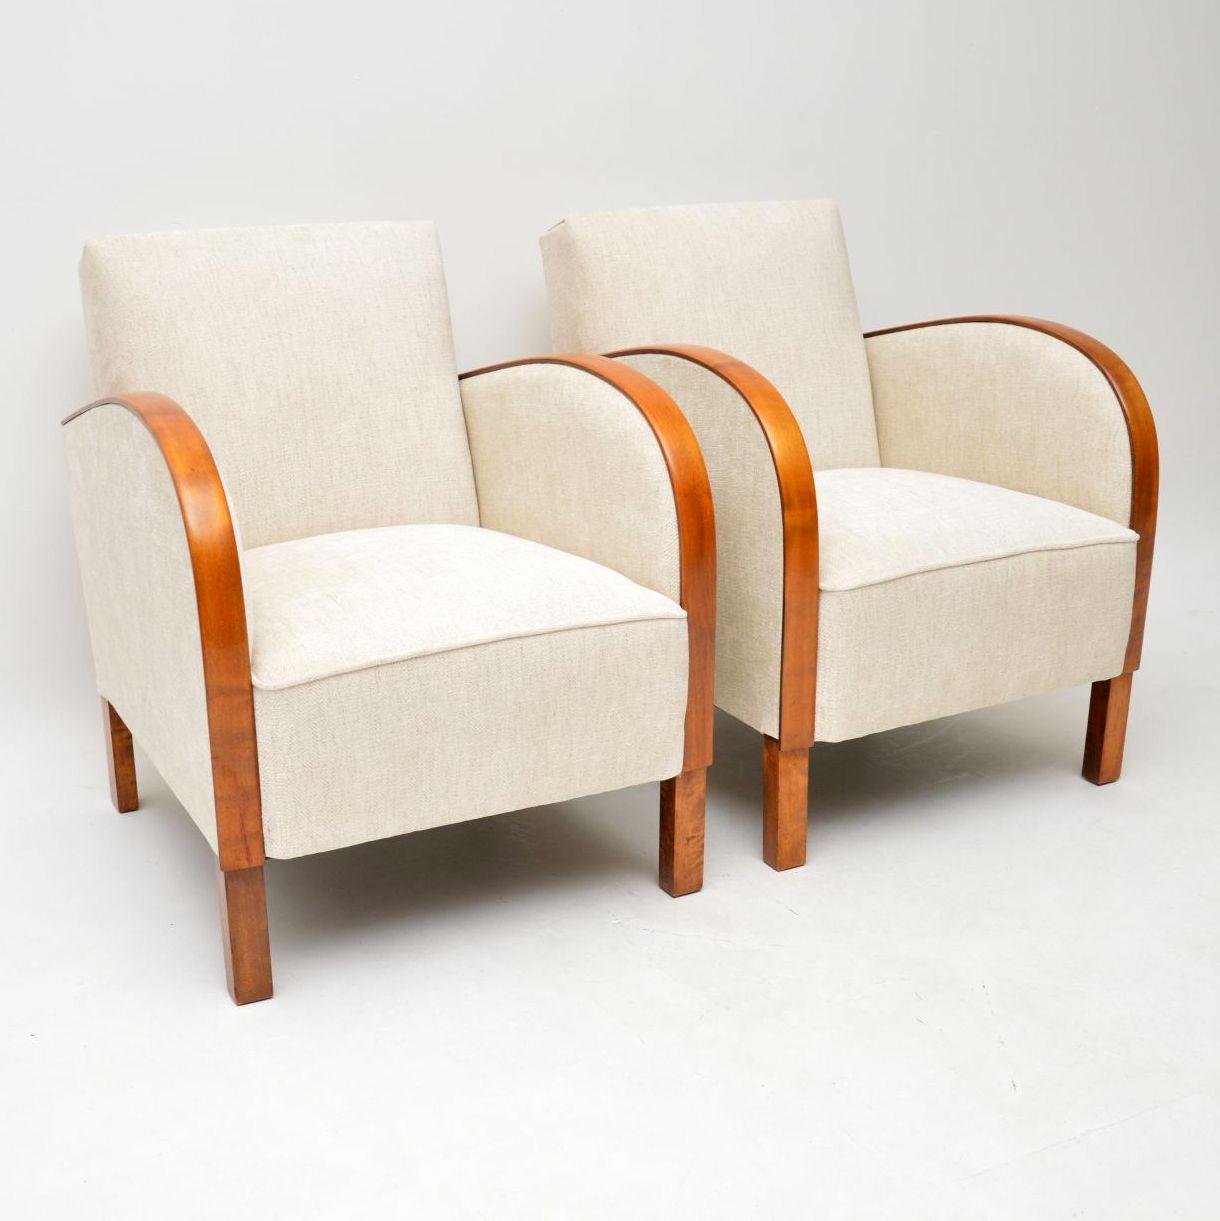 It’s been a while since we have had a pair of these Classic original Swedish Art Deco armchairs in. There was a time when we were bringing two or three similar pairs over from Sweden every month, but they are obviously getting scarce. Anyway, we